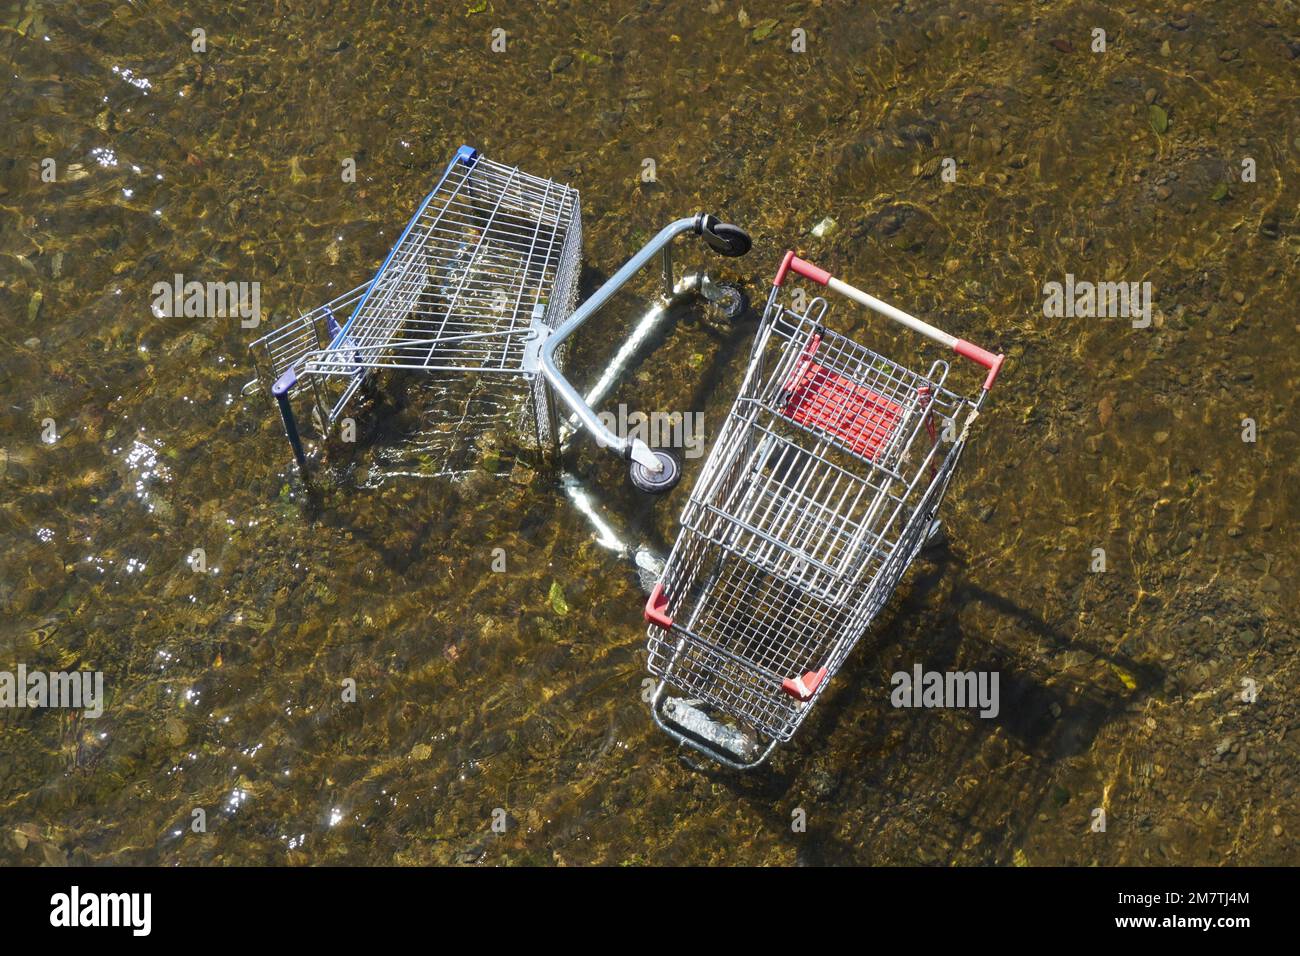 Toppled Shopping Trolleys in Shallow Water Stock Photo